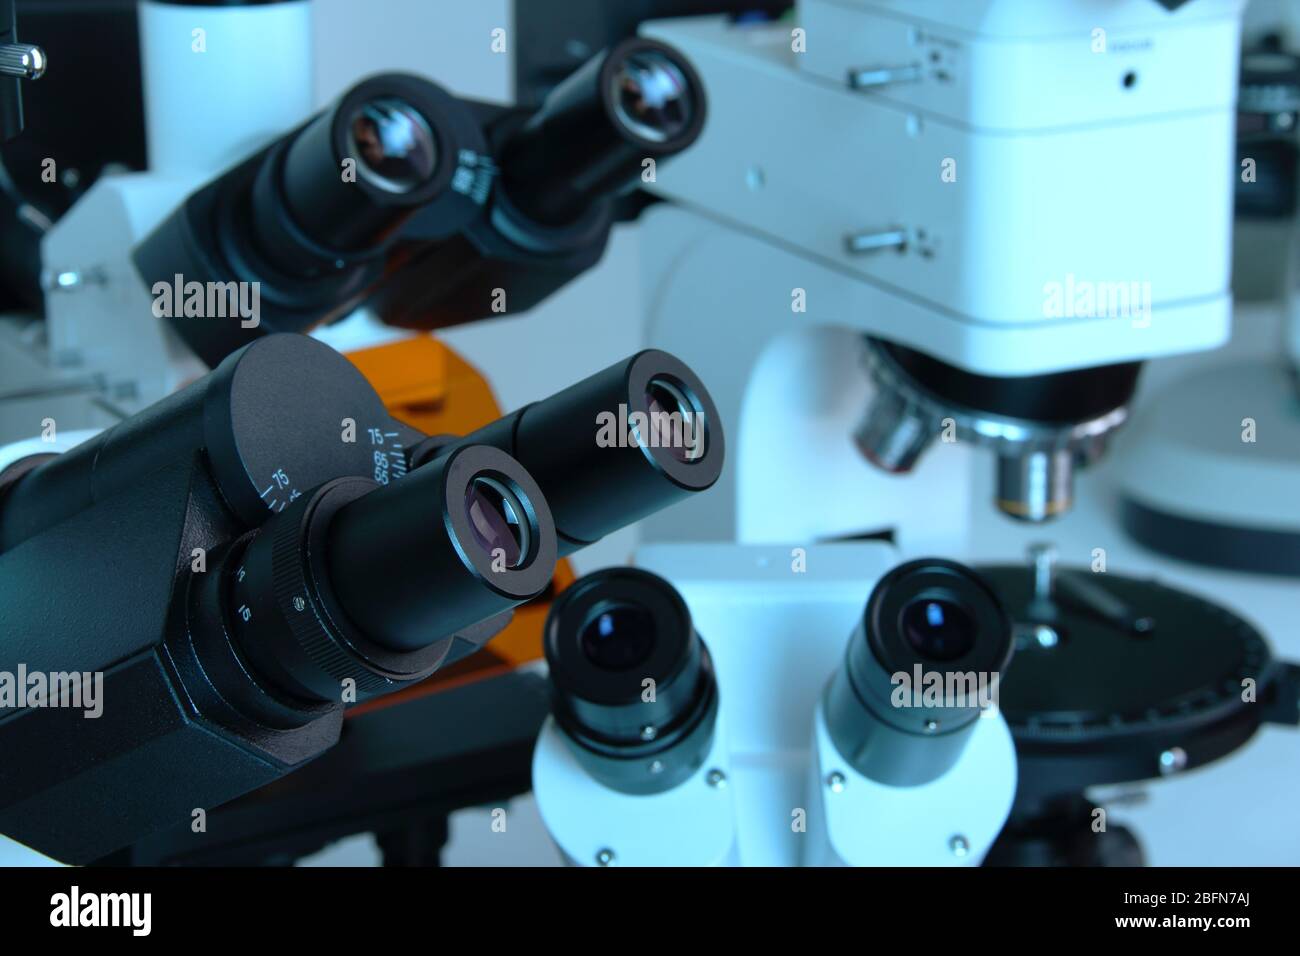 Group of various Microscopes in blue medicine light microbiology research concept Stock Photo